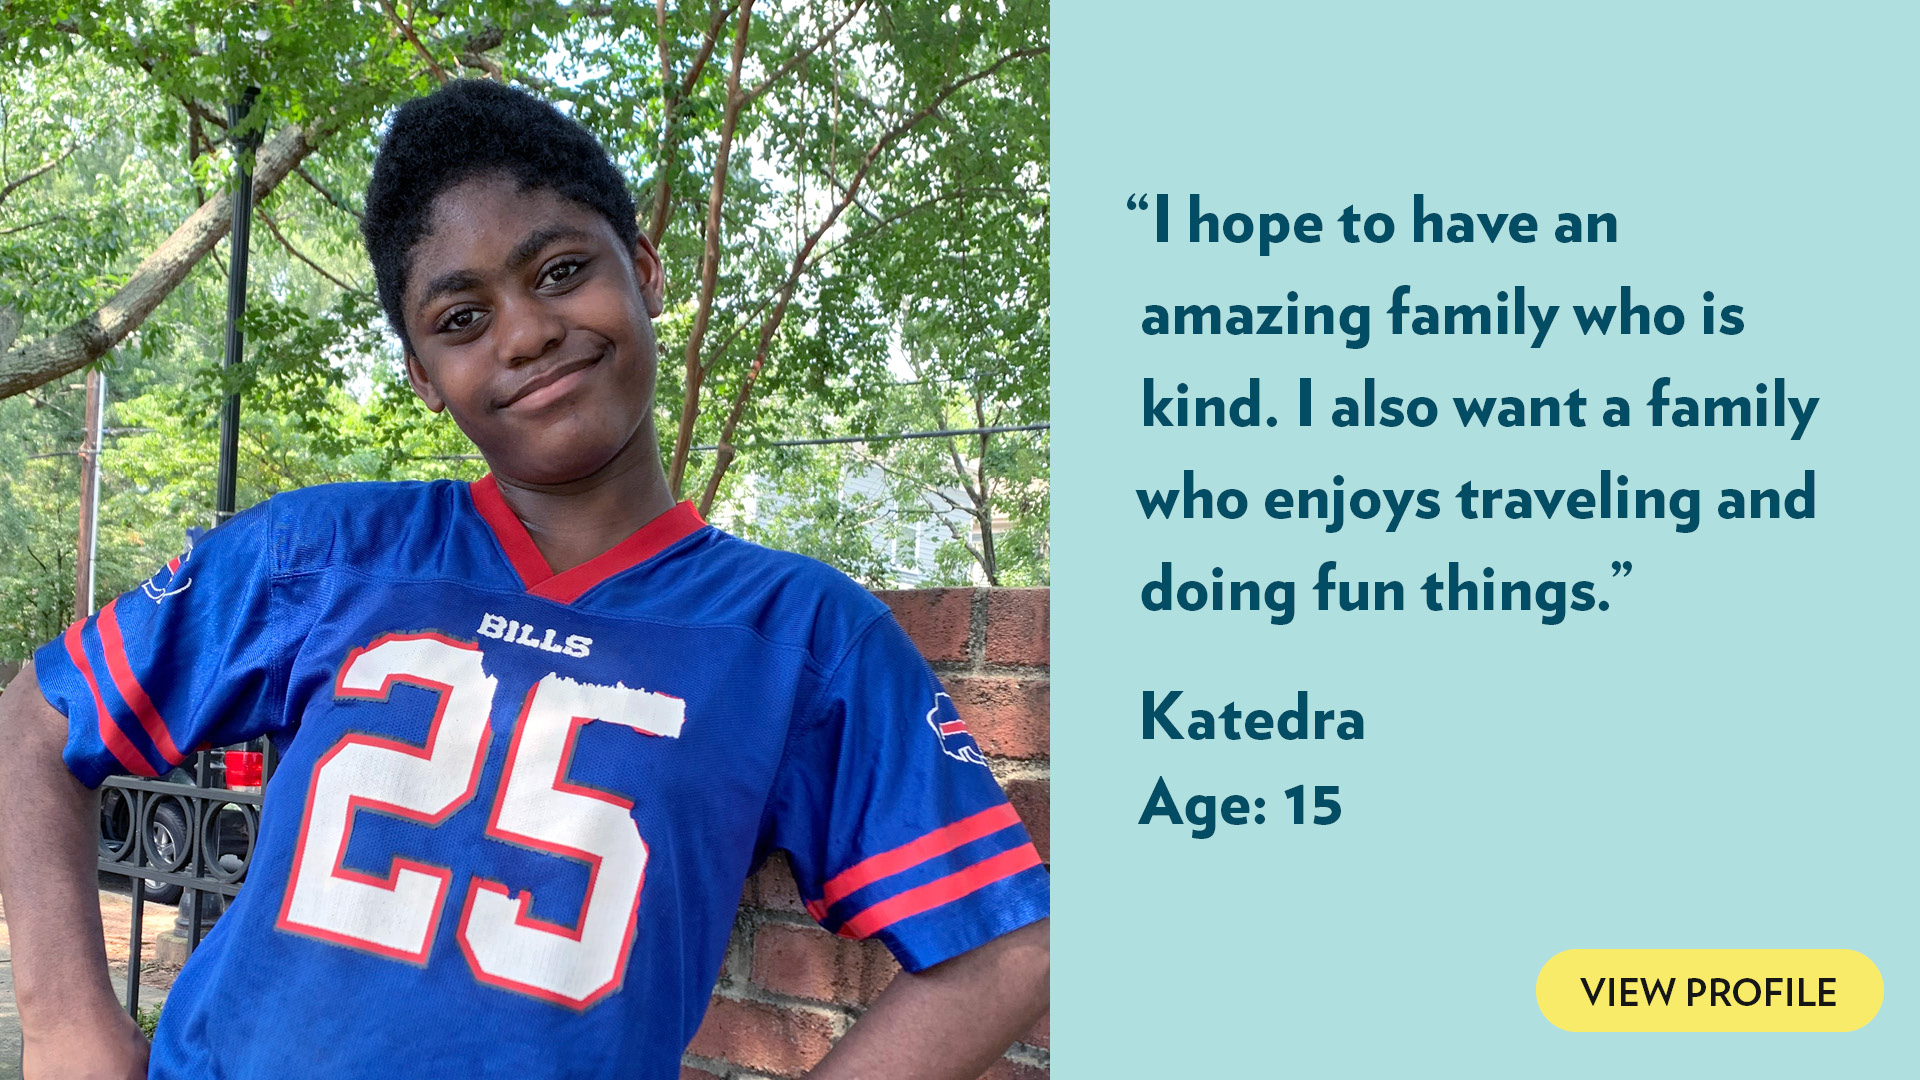 I hope to have an amazing family who is kind. I also want a family who enjoys traveling and doing fun things. Katedra, age 15. View profile.